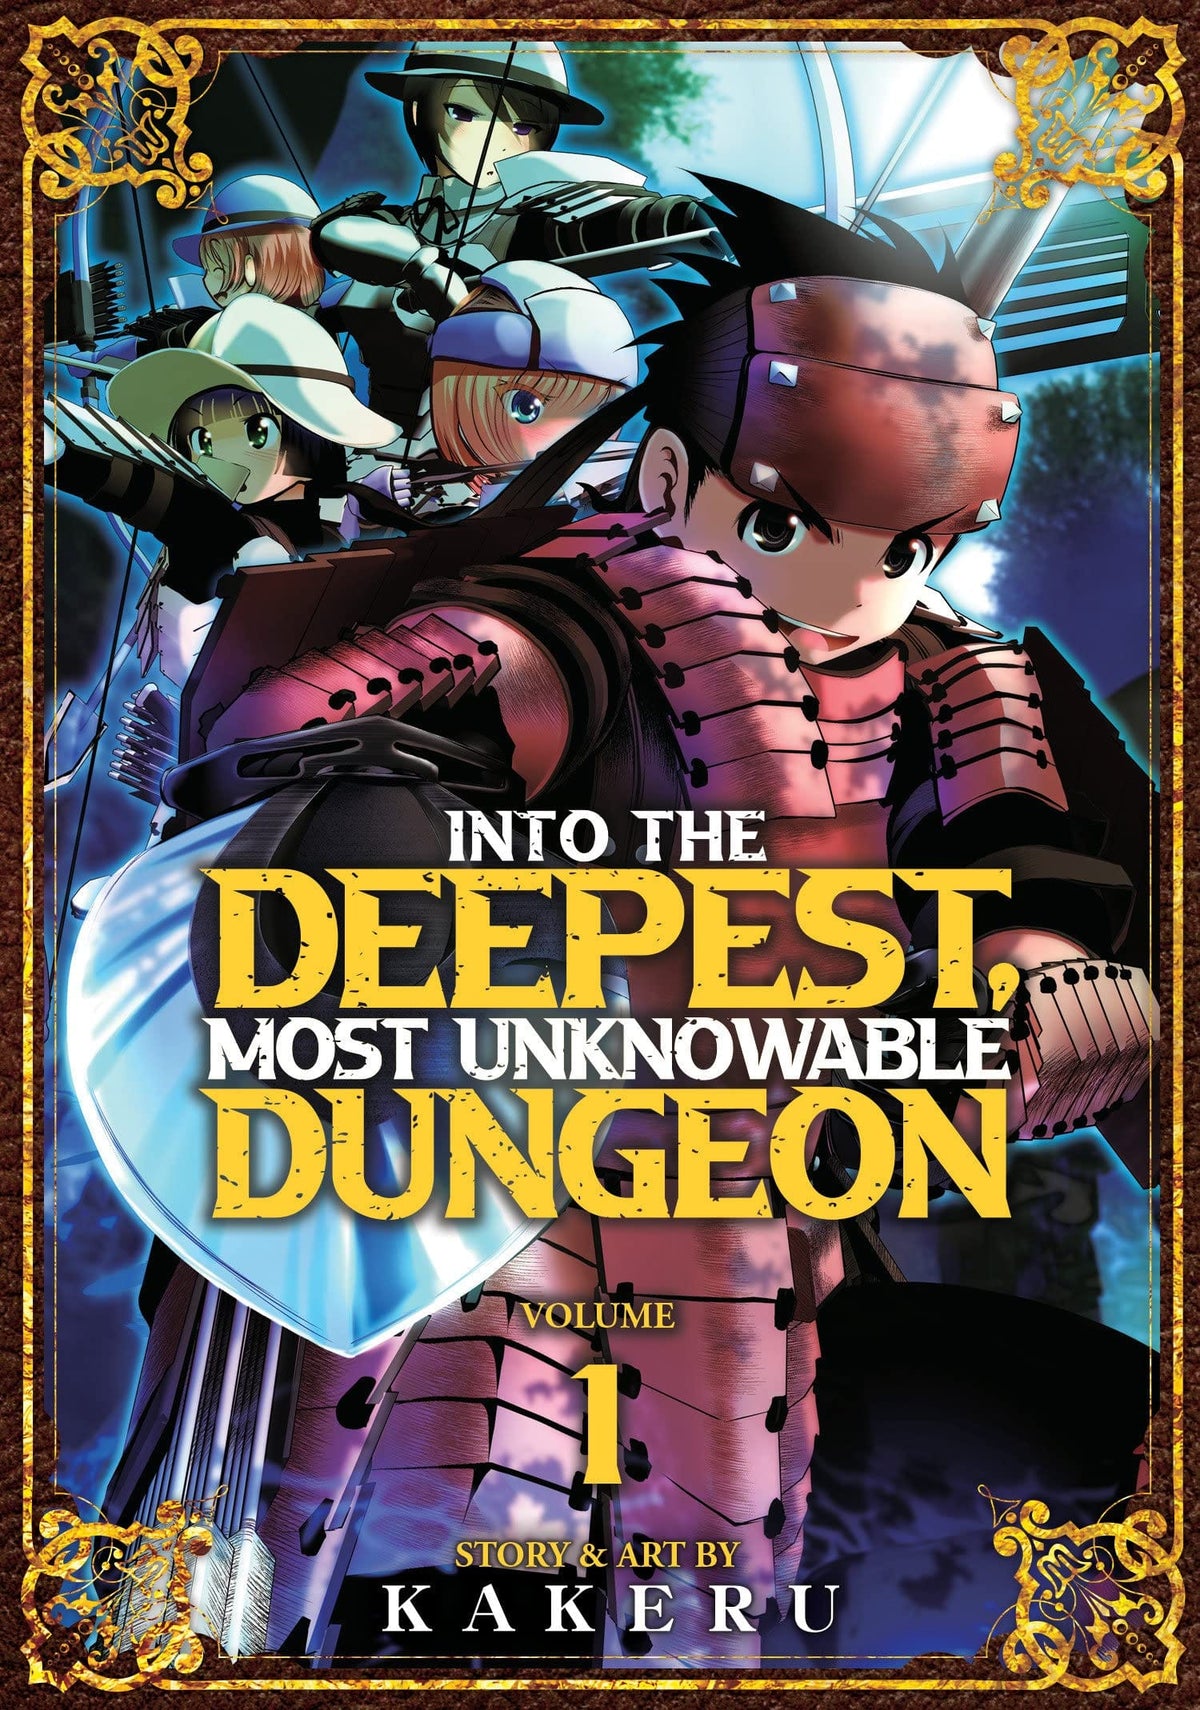 Into the Deepest Most Unknowable Dungeon Vol. 1 - Third Eye